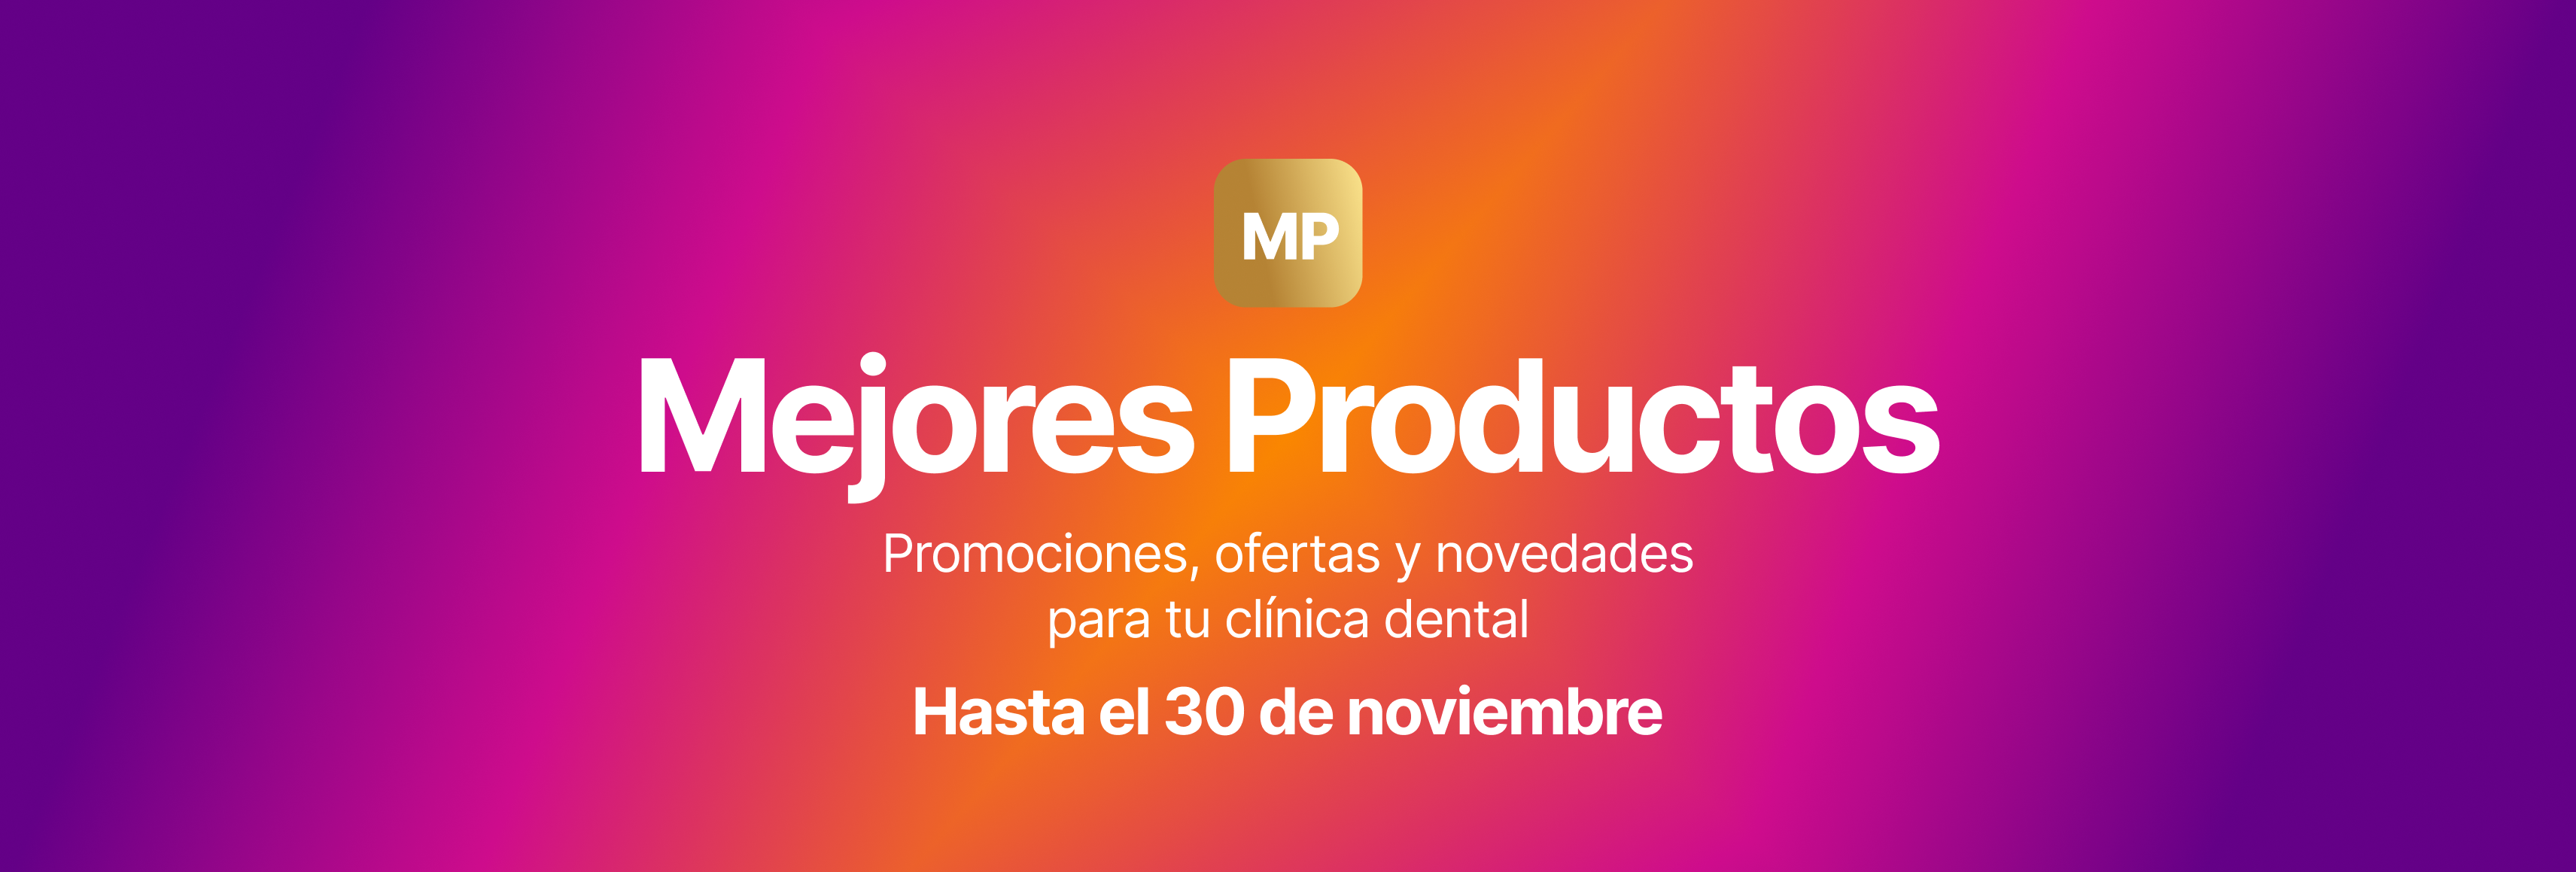 Mejores productos Incotrading